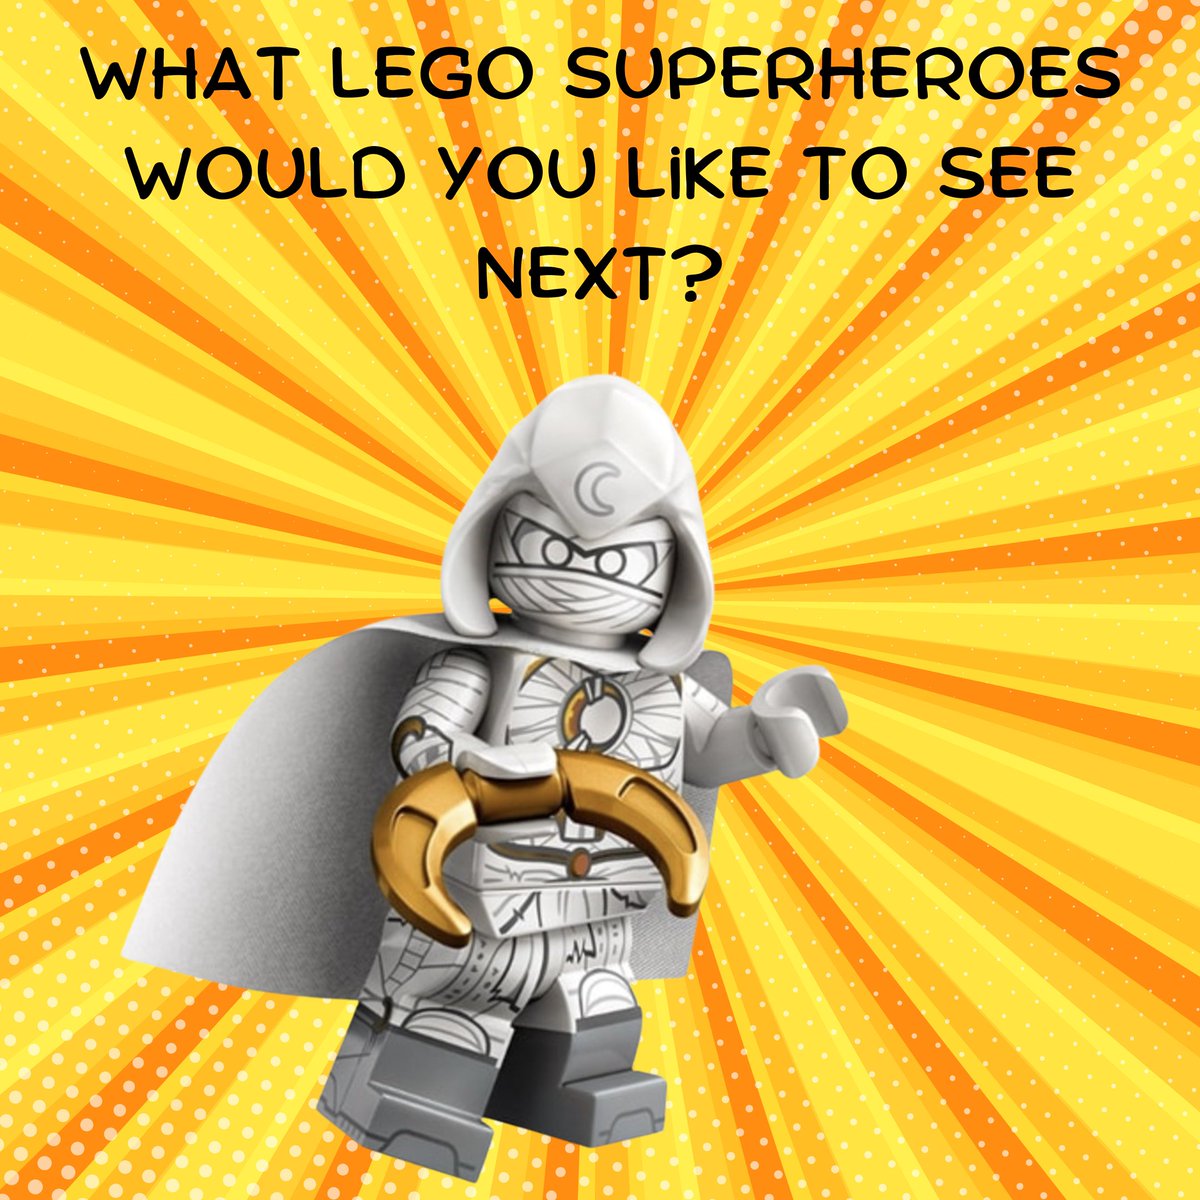 We've seen countless heroes made into LEGO minifigures. Who is your dream LEGO character based on a comic book superhero? #LEGO #Comics #Marvel #DC